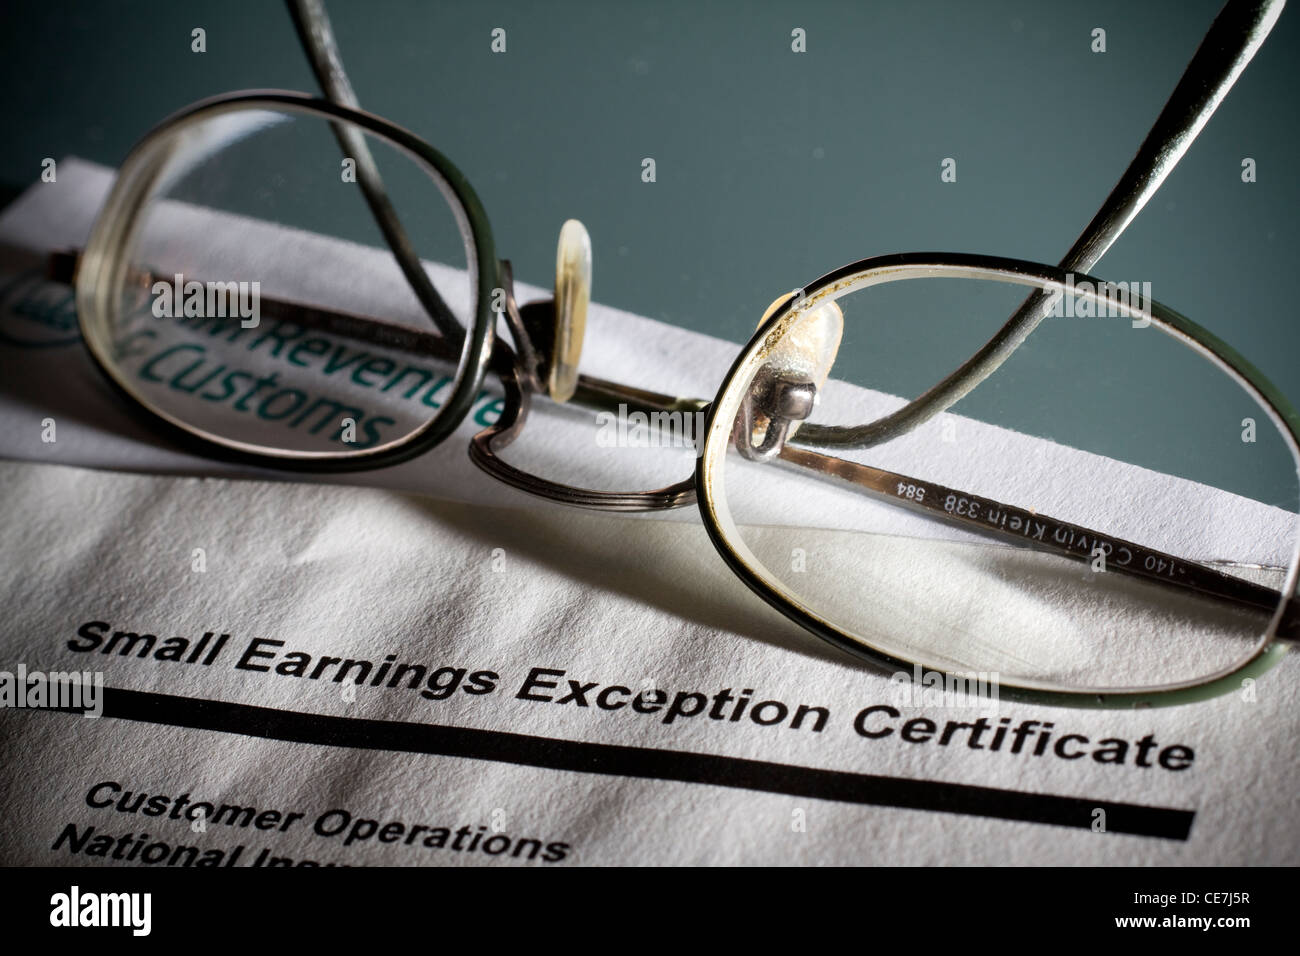 small earnings exception certificate hmrc tax form Stock Photo